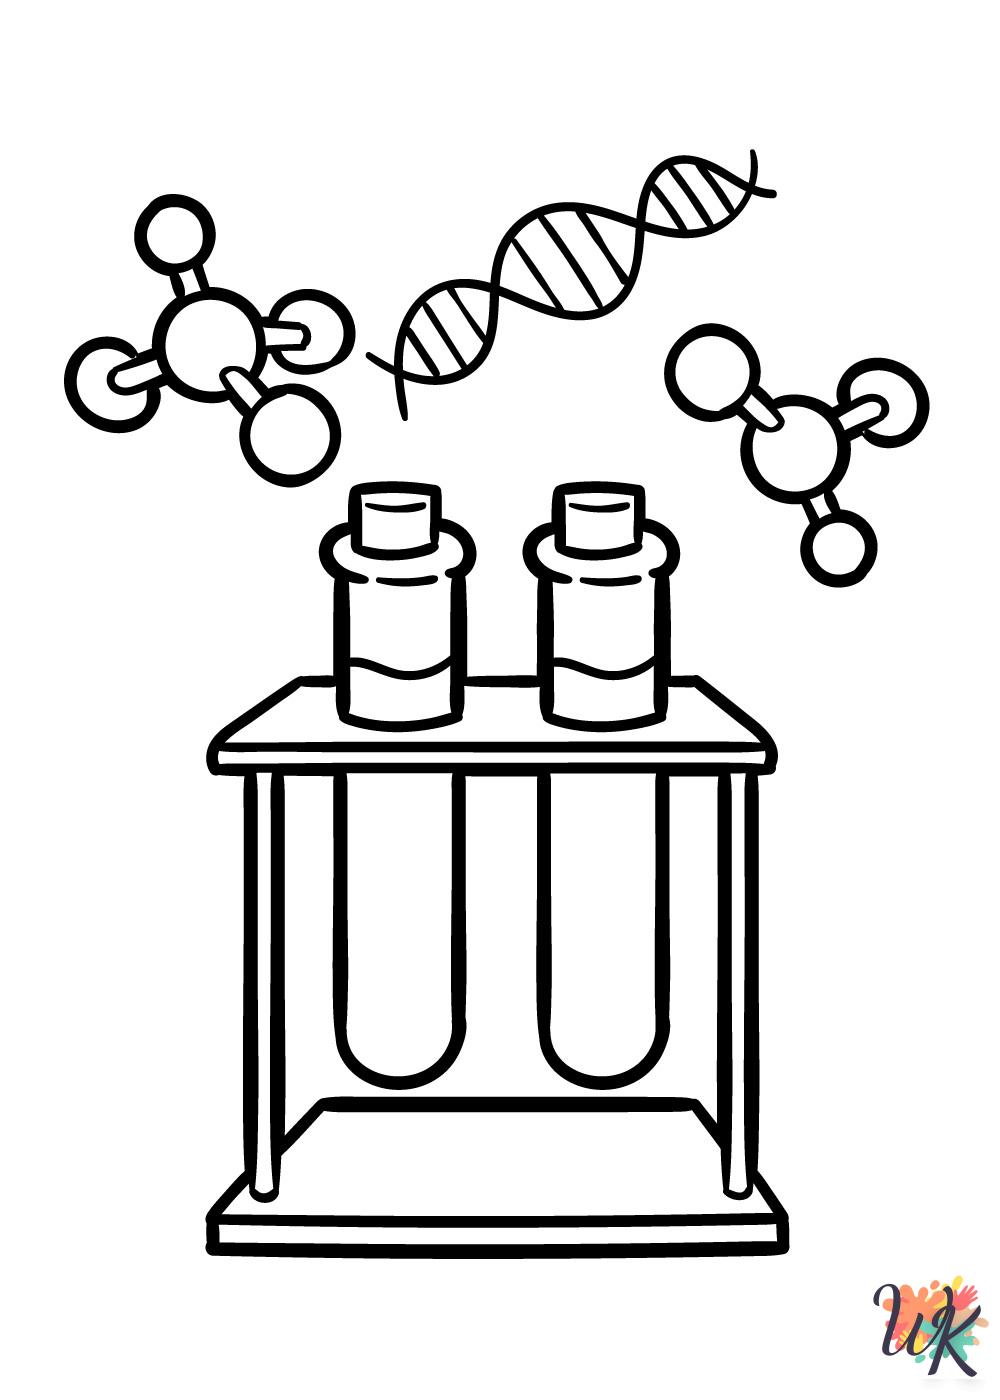 Science free coloring pages